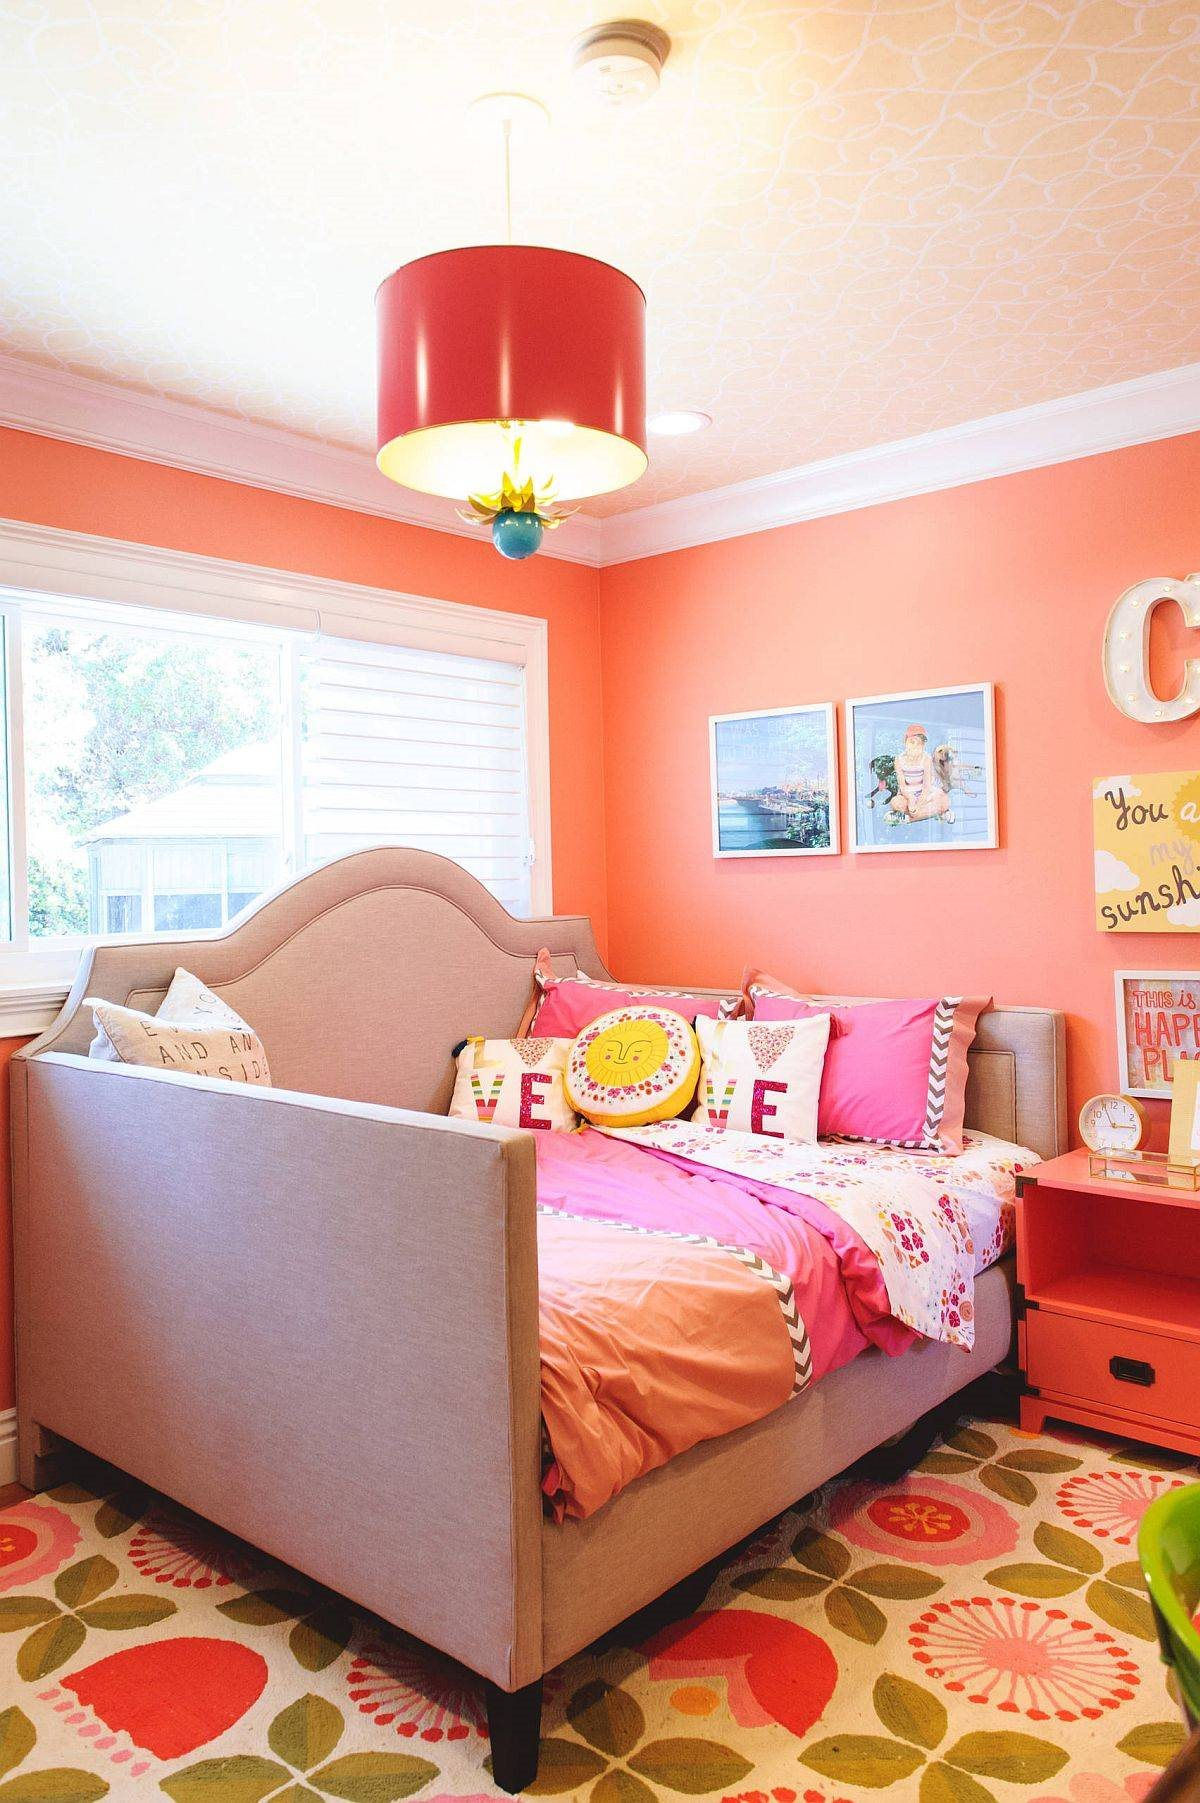 charming-orange-backdrop-in-the-kids-bedroom-with-wallpapered-ceiling-and-smart-pendant-light-51599.jpg